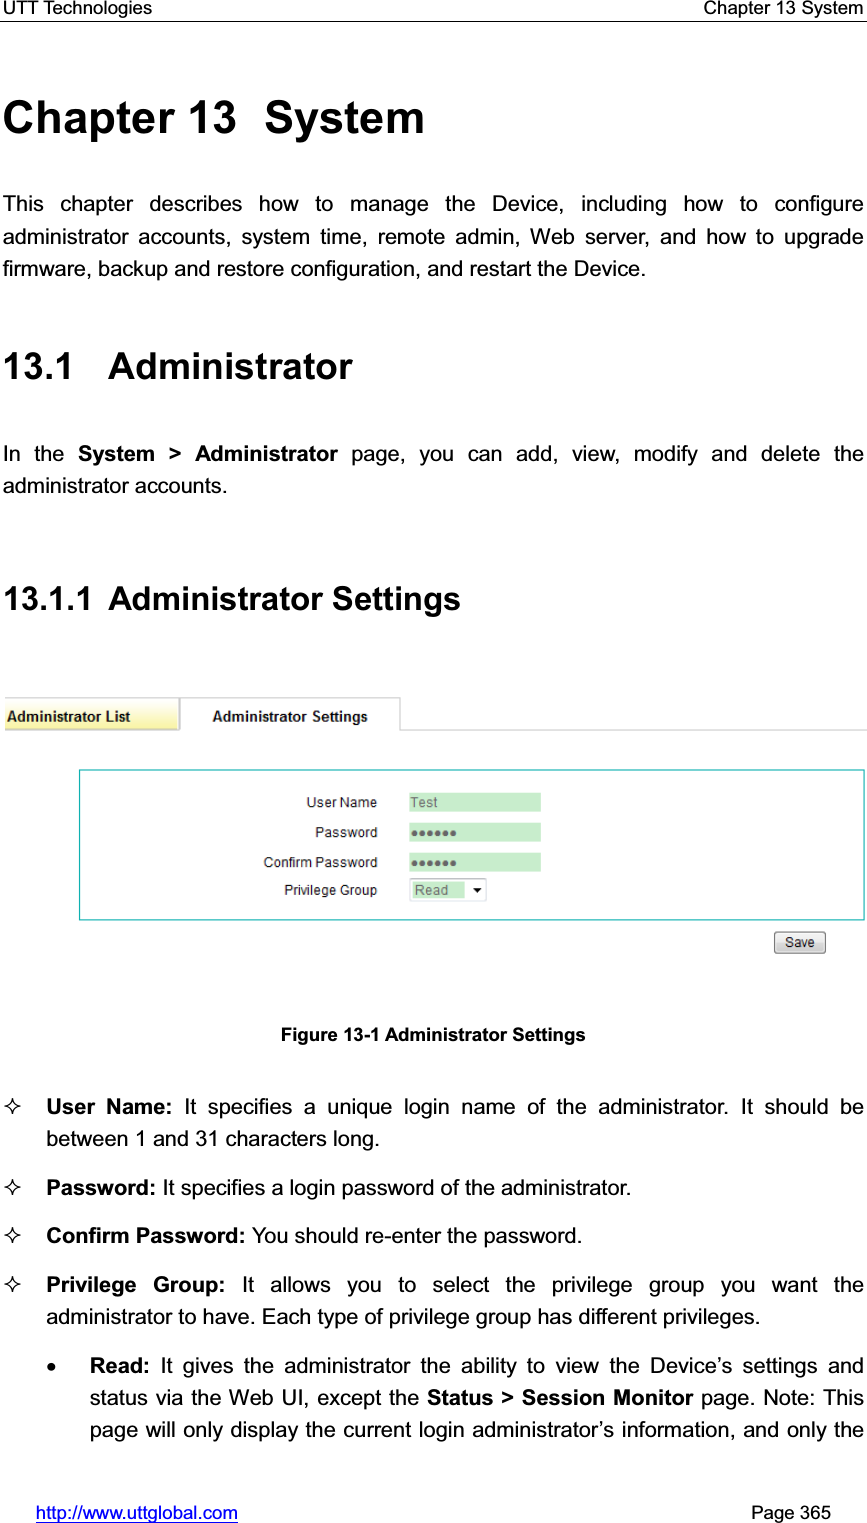 UTT Technologies    Chapter 13 System   http://www.uttglobal.com                                                       Page 365 Chapter 13  System This chapter describes how to manage the Device, including how to configure administrator accounts, system time, remote admin, Web server, and how to upgrade firmware, backup and restore configuration, and restart the Device. 13.1 Administrator In the System &gt; Administrator page, you can add, view, modify and delete the administrator accounts. 13.1.1 Administrator Settings  Figure 13-1 Administrator Settings User Name: It specifies a unique login name of the administrator. It should be between 1 and 31 characters long.   Password: It specifies a login password of the administrator. Confirm Password: You should re-enter the password. Privilege Group: It allows you to select the privilege group you want the administrator to have. Each type of privilege group has different privileges. xRead: It gives the administrator the ability to view the &apos;HYLFH¶s settings and status via the Web UI, except the Status &gt; Session Monitor page. Note: This page will only display the current login administrator¶s information, and only the 